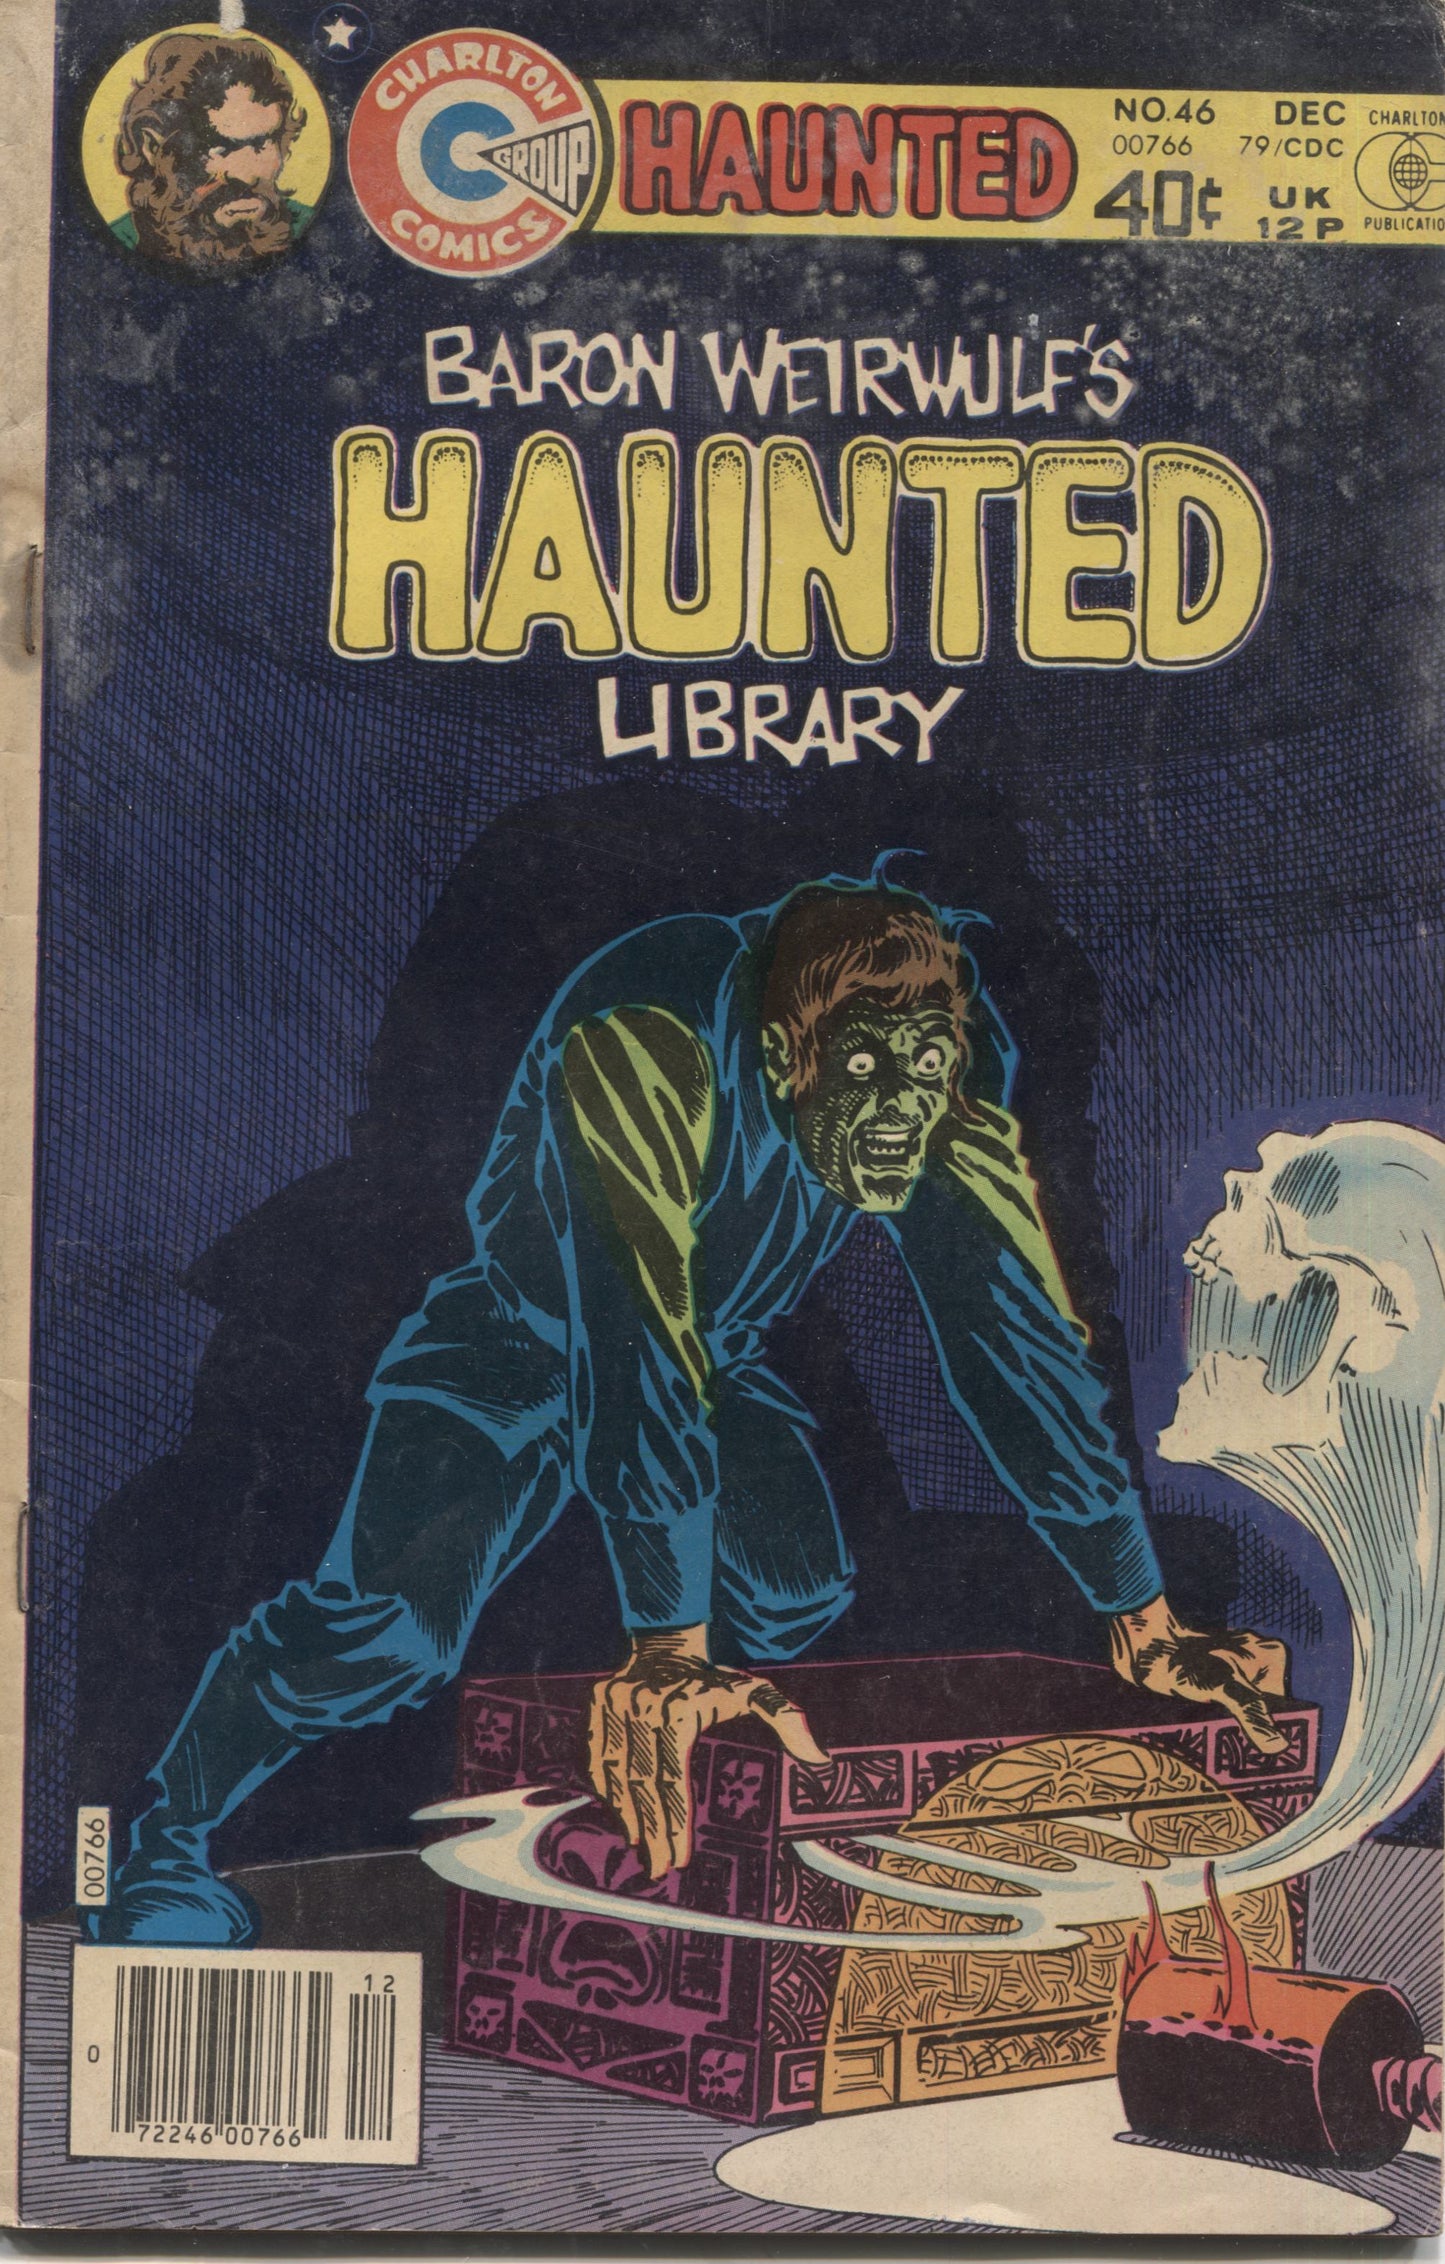 Haunted No. 46, "A Real Gone Guy," Charlton Comics, December 1979